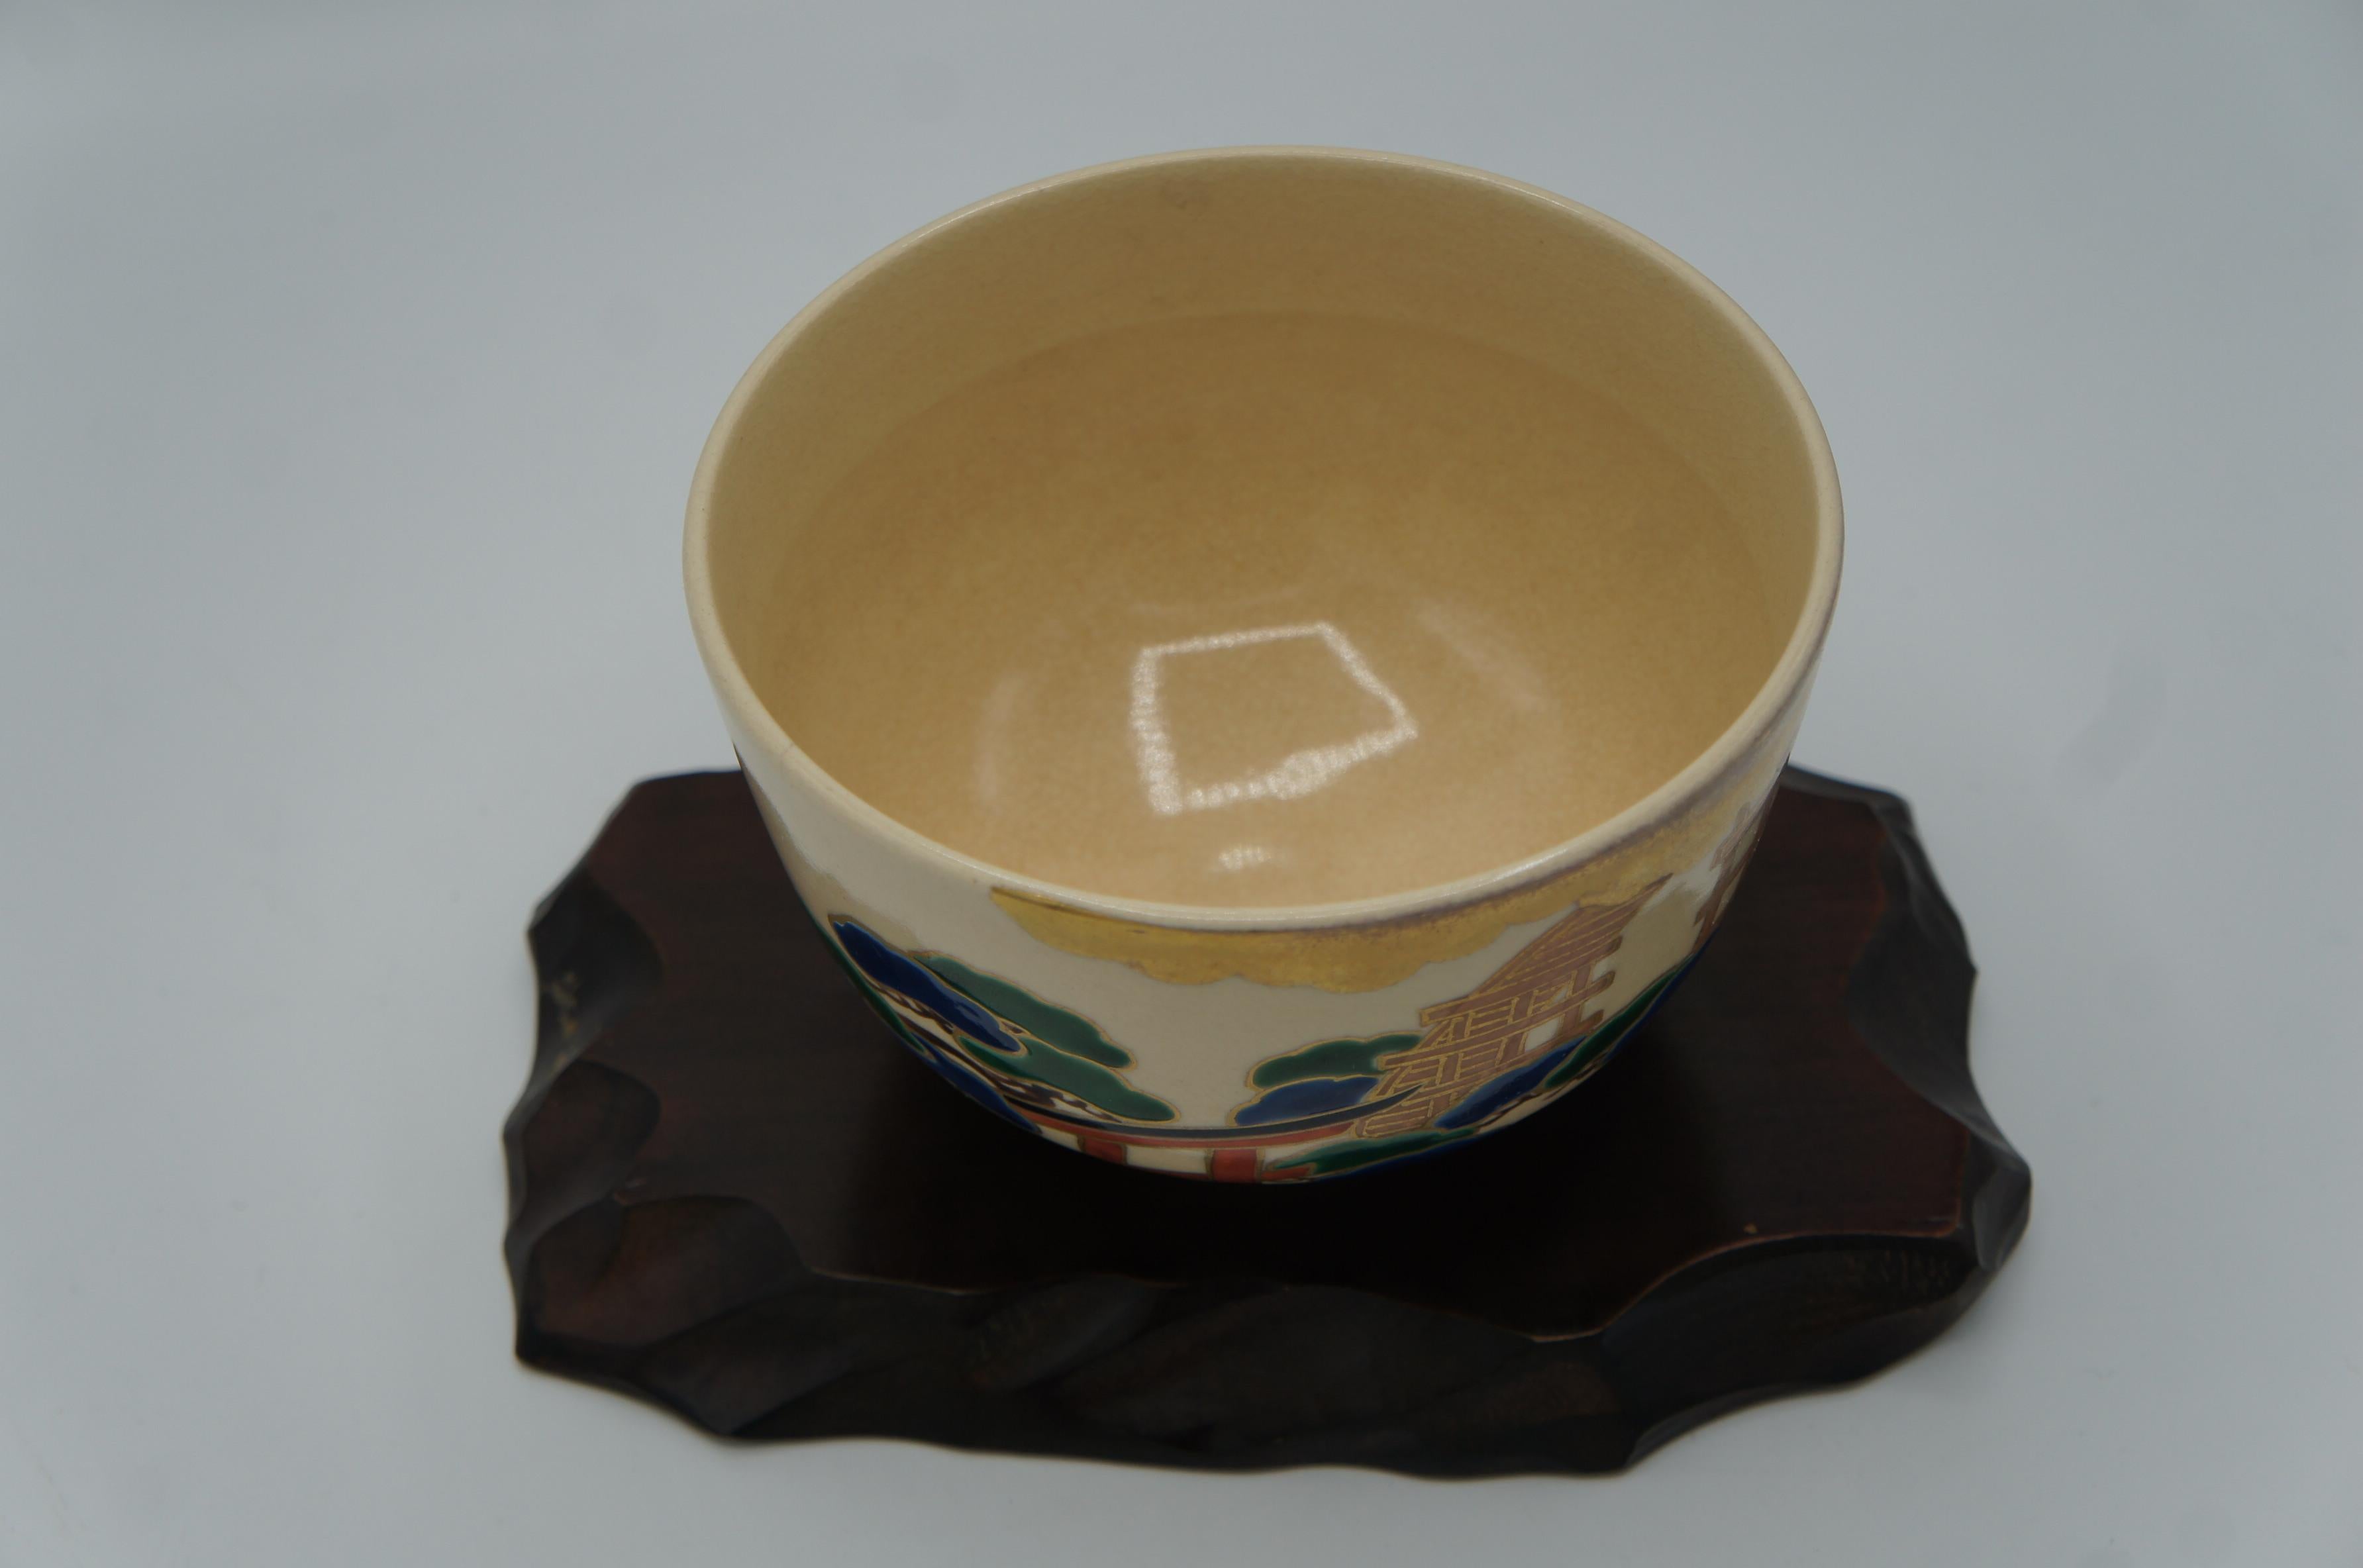 This is a Matcha bowl for tea ceremony.
It was made in Kyoto prefecture, Japan. It is made with porcelain and the style is Kiyomizu ware.
It was made around 1970s in Showa era.

Dimension:
H8 × 12 × 12cm